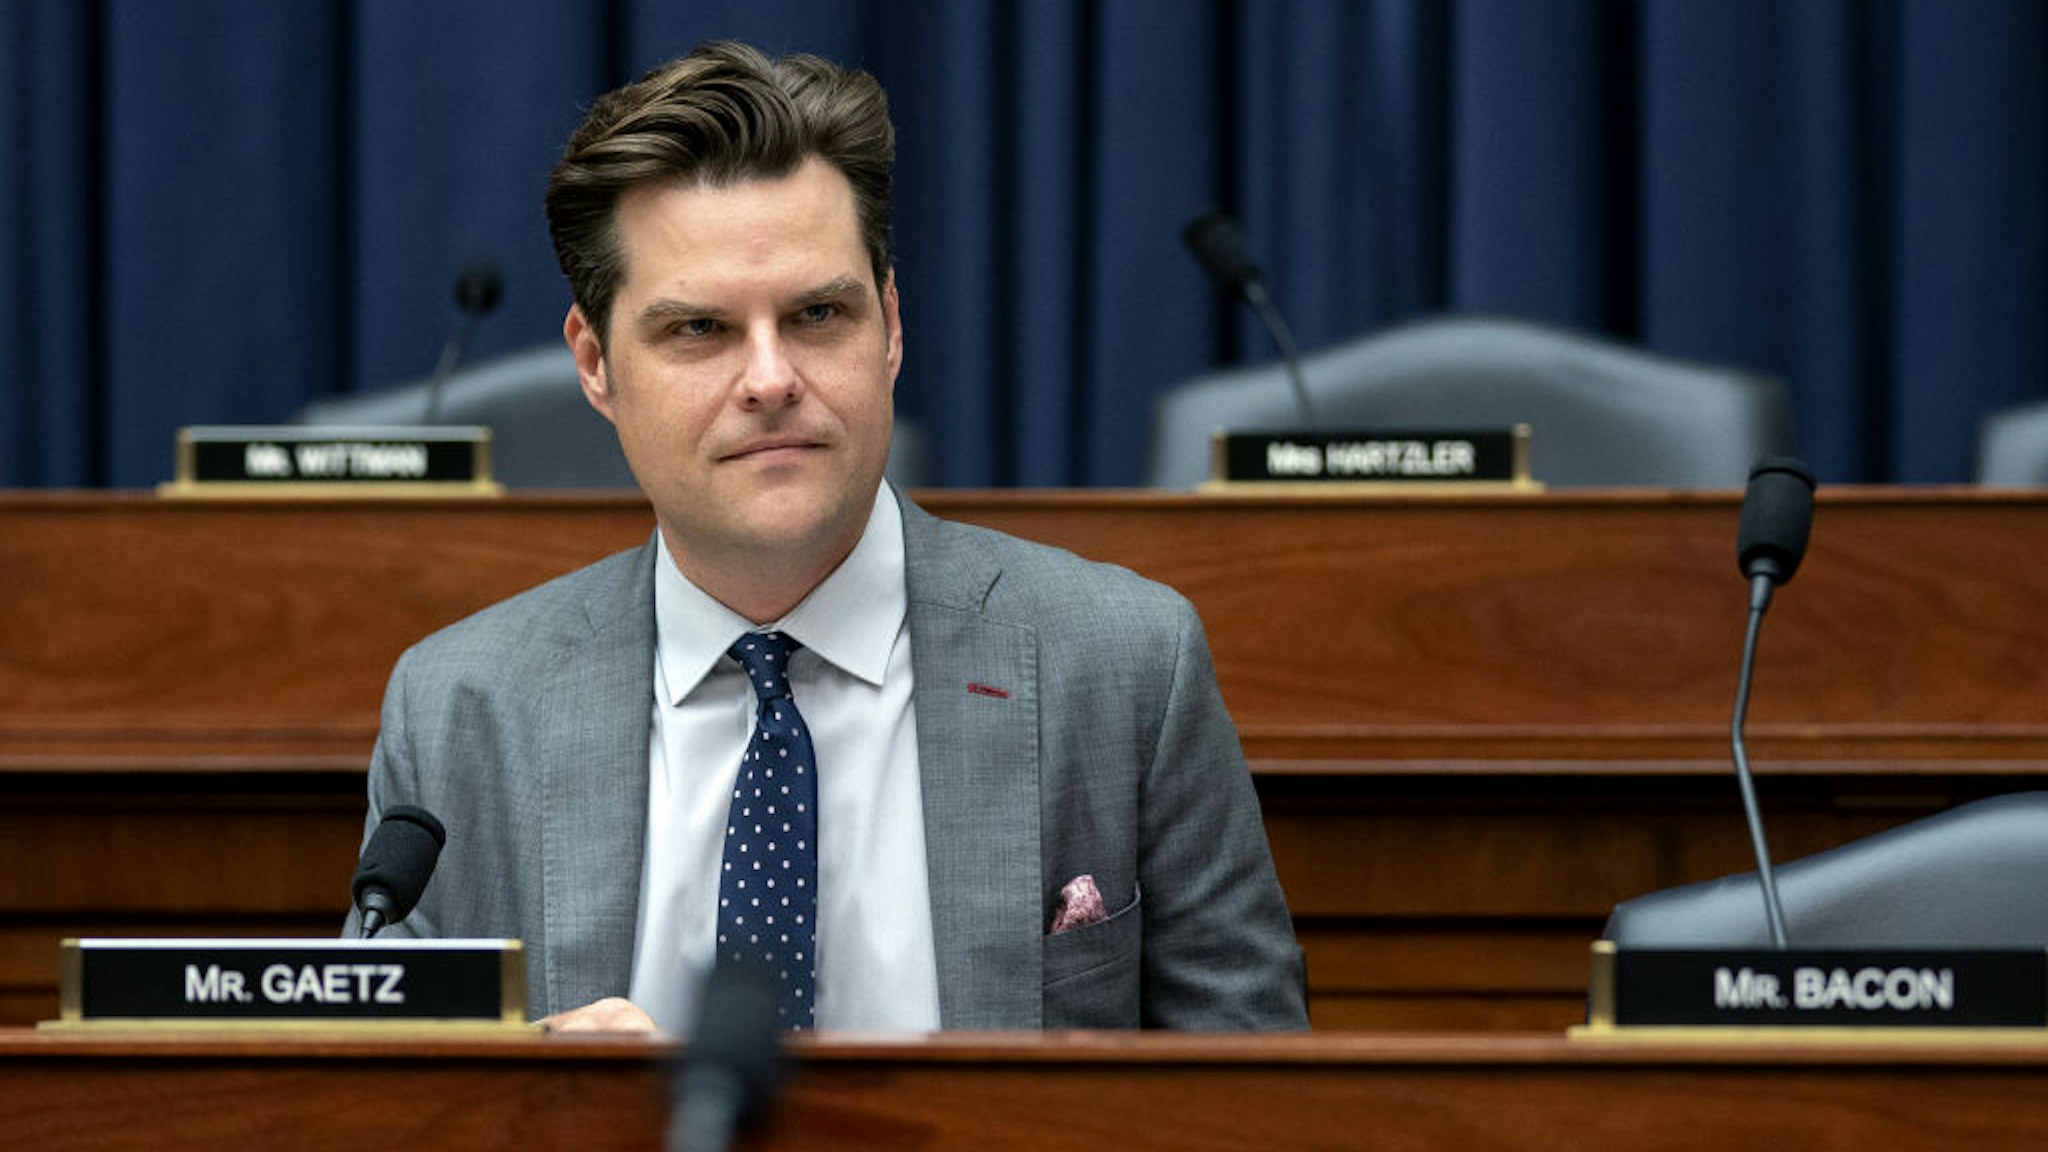 Representative Matt Gaetz, a Republican from Florida, arrives to a House Armed Services Committee hearing in Washington, D.C., U.S., on Wednesday, June 23, 2021.